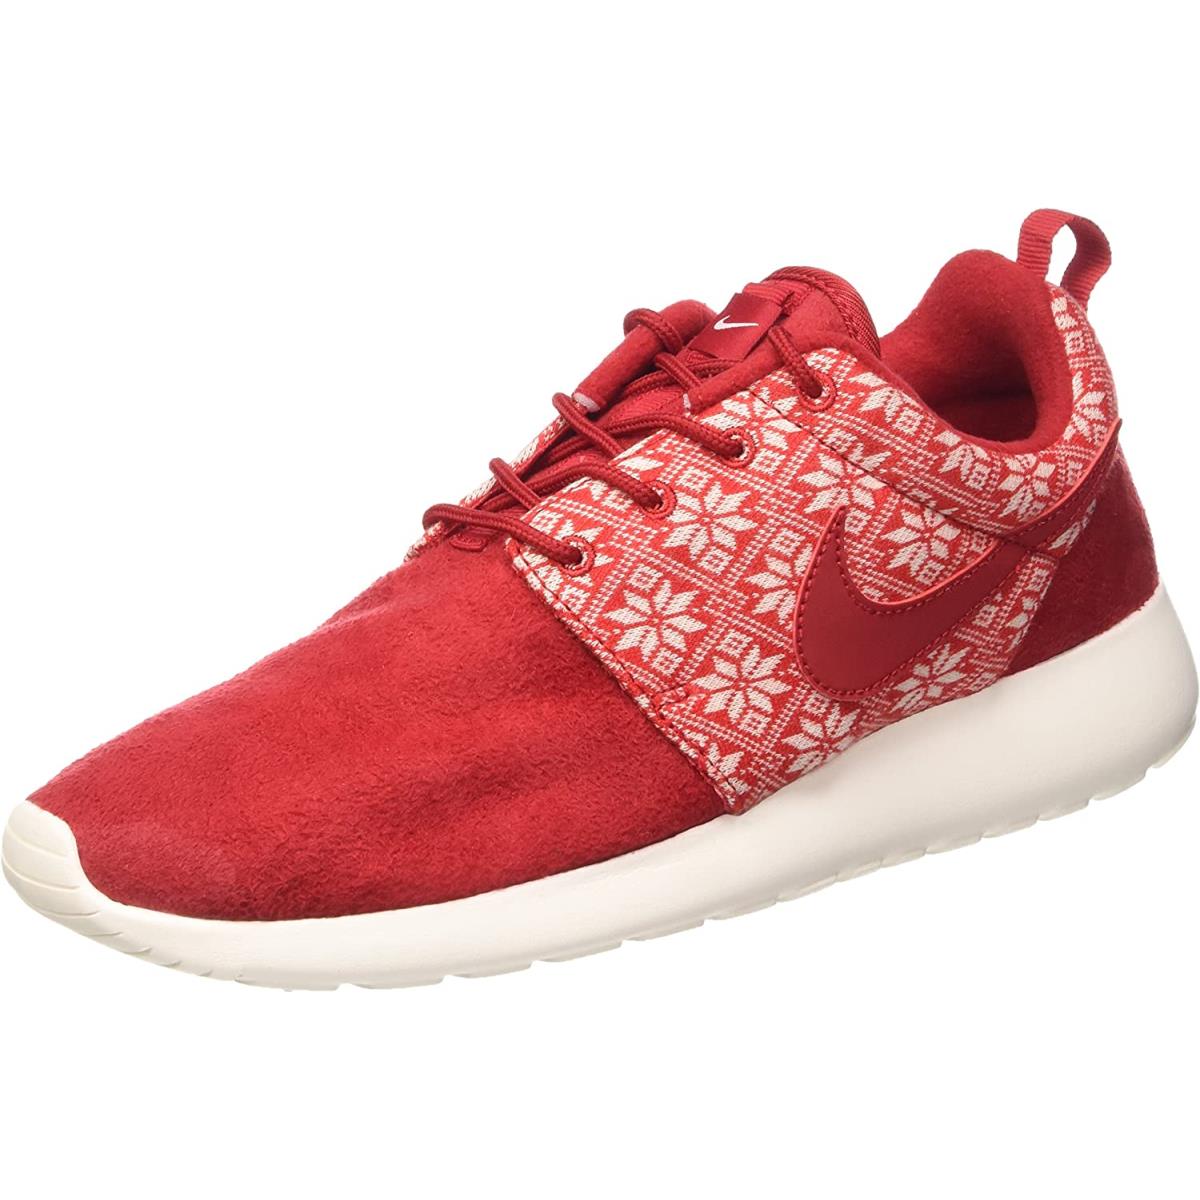 Nike Roshe One Winter Red/white Running Shoes 807440-441 Men Size 13 Gym Red/Gym Red-sail